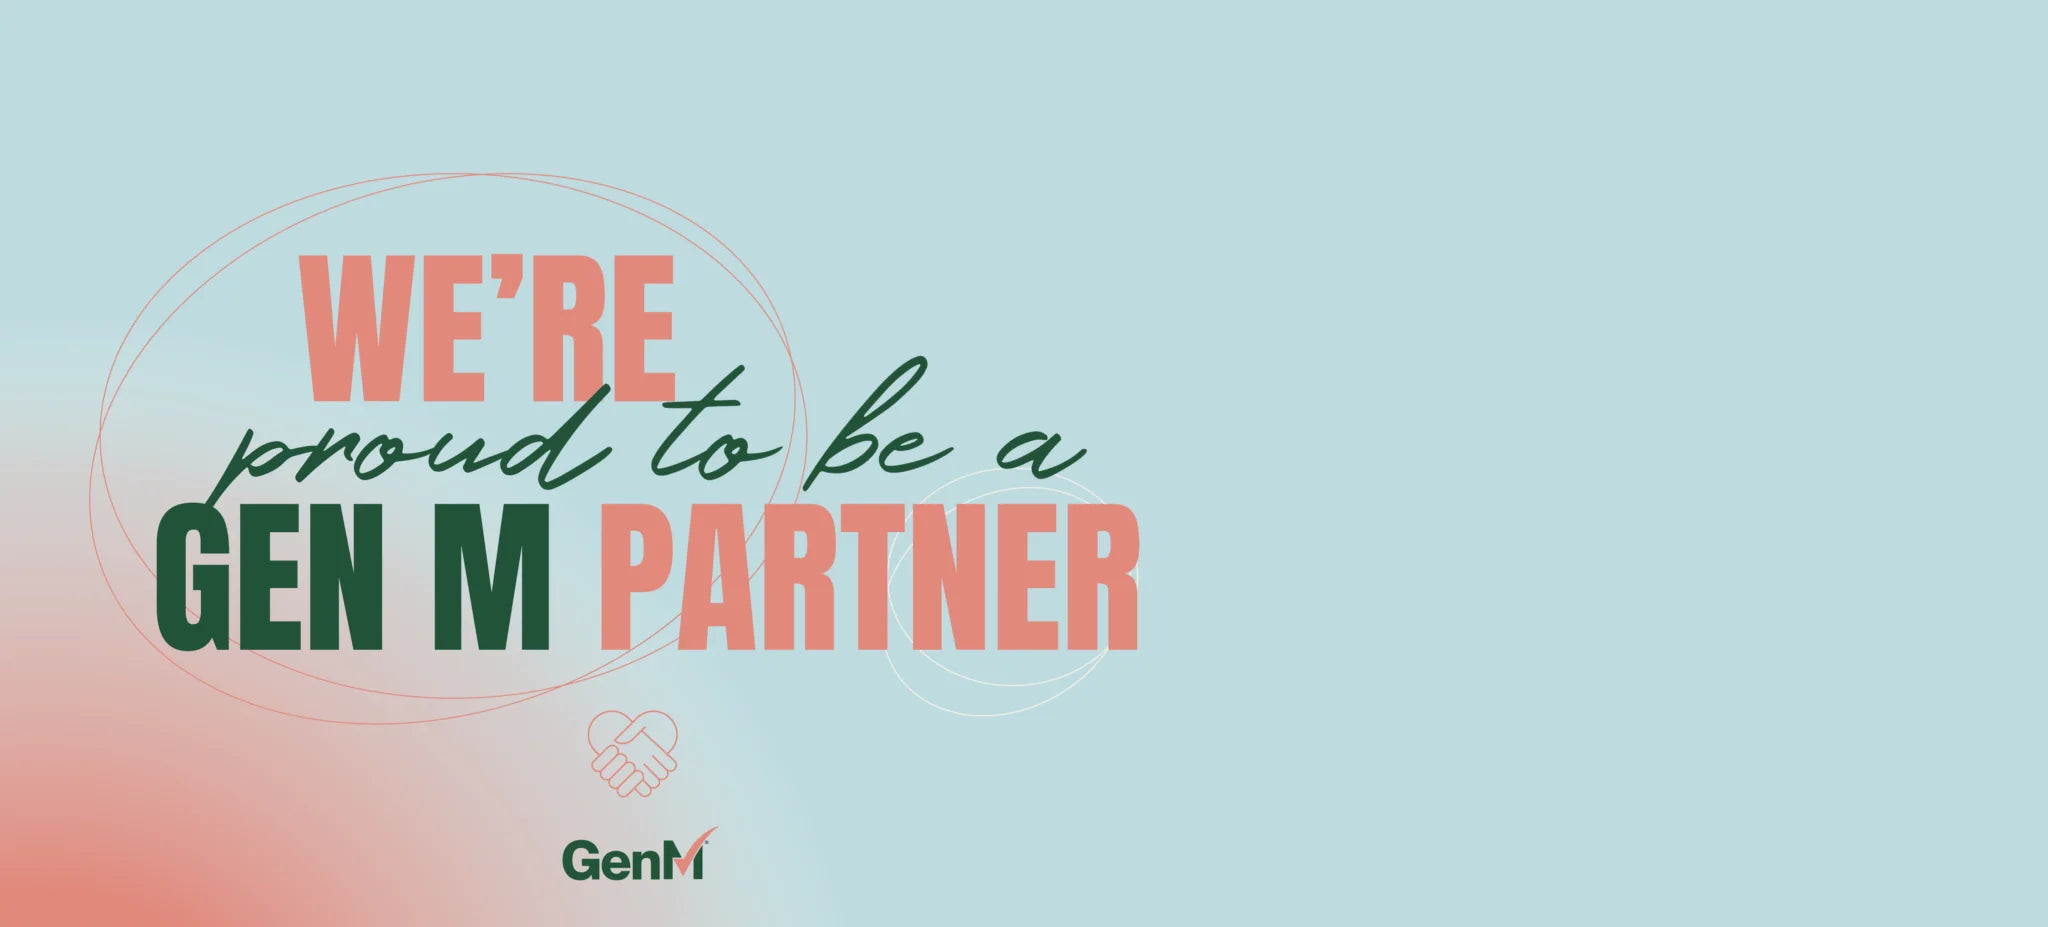 Our partnership with GenM